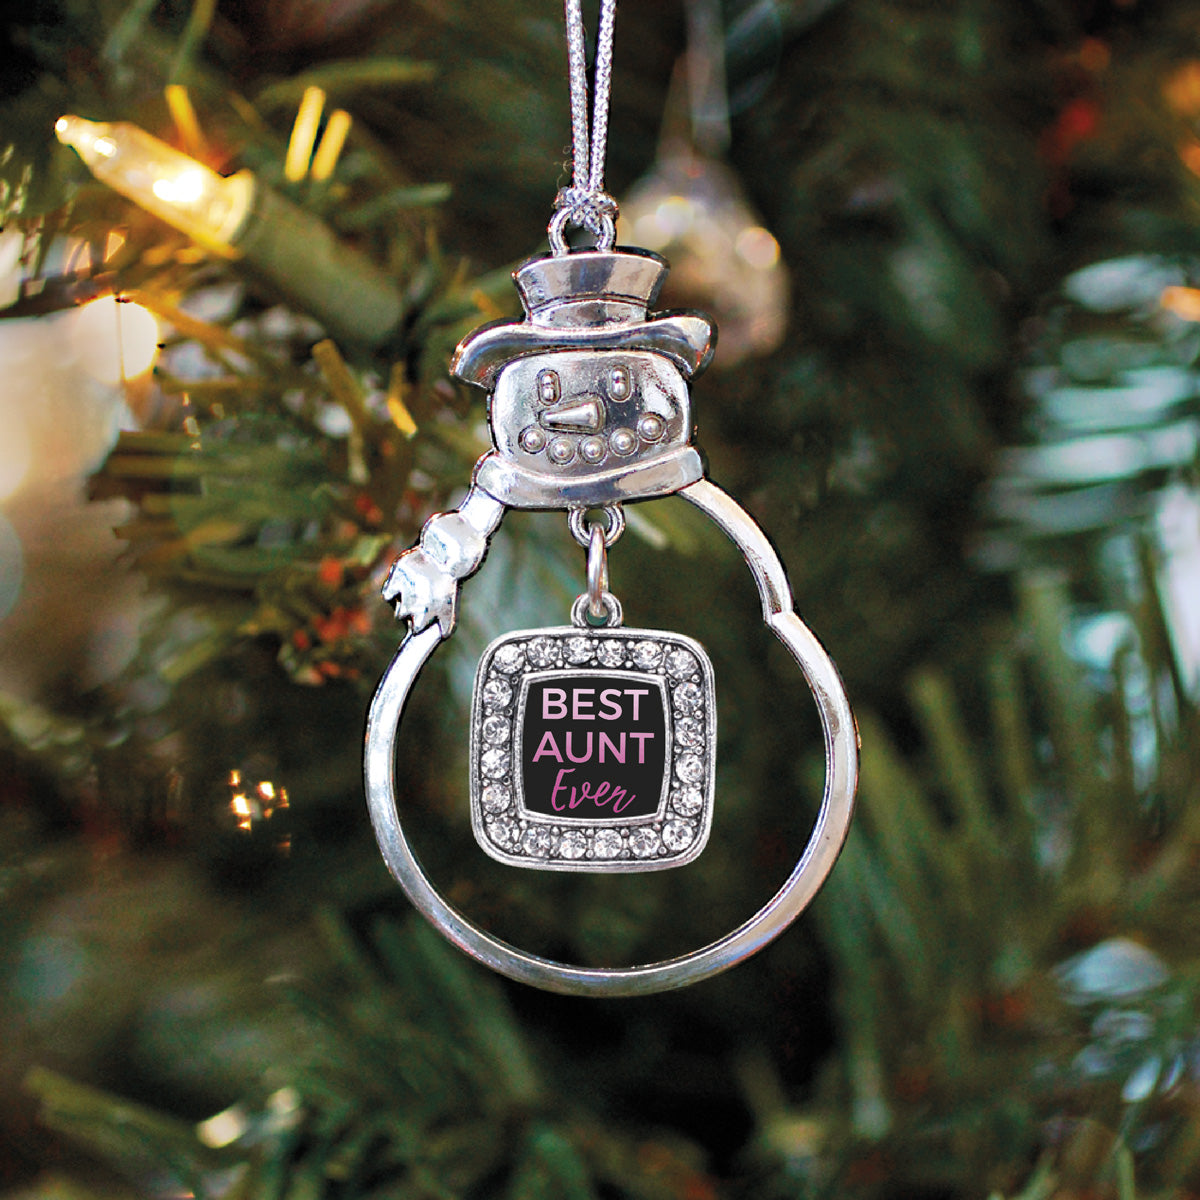 Best Aunt Ever Square Charm Christmas / Holiday Ornament